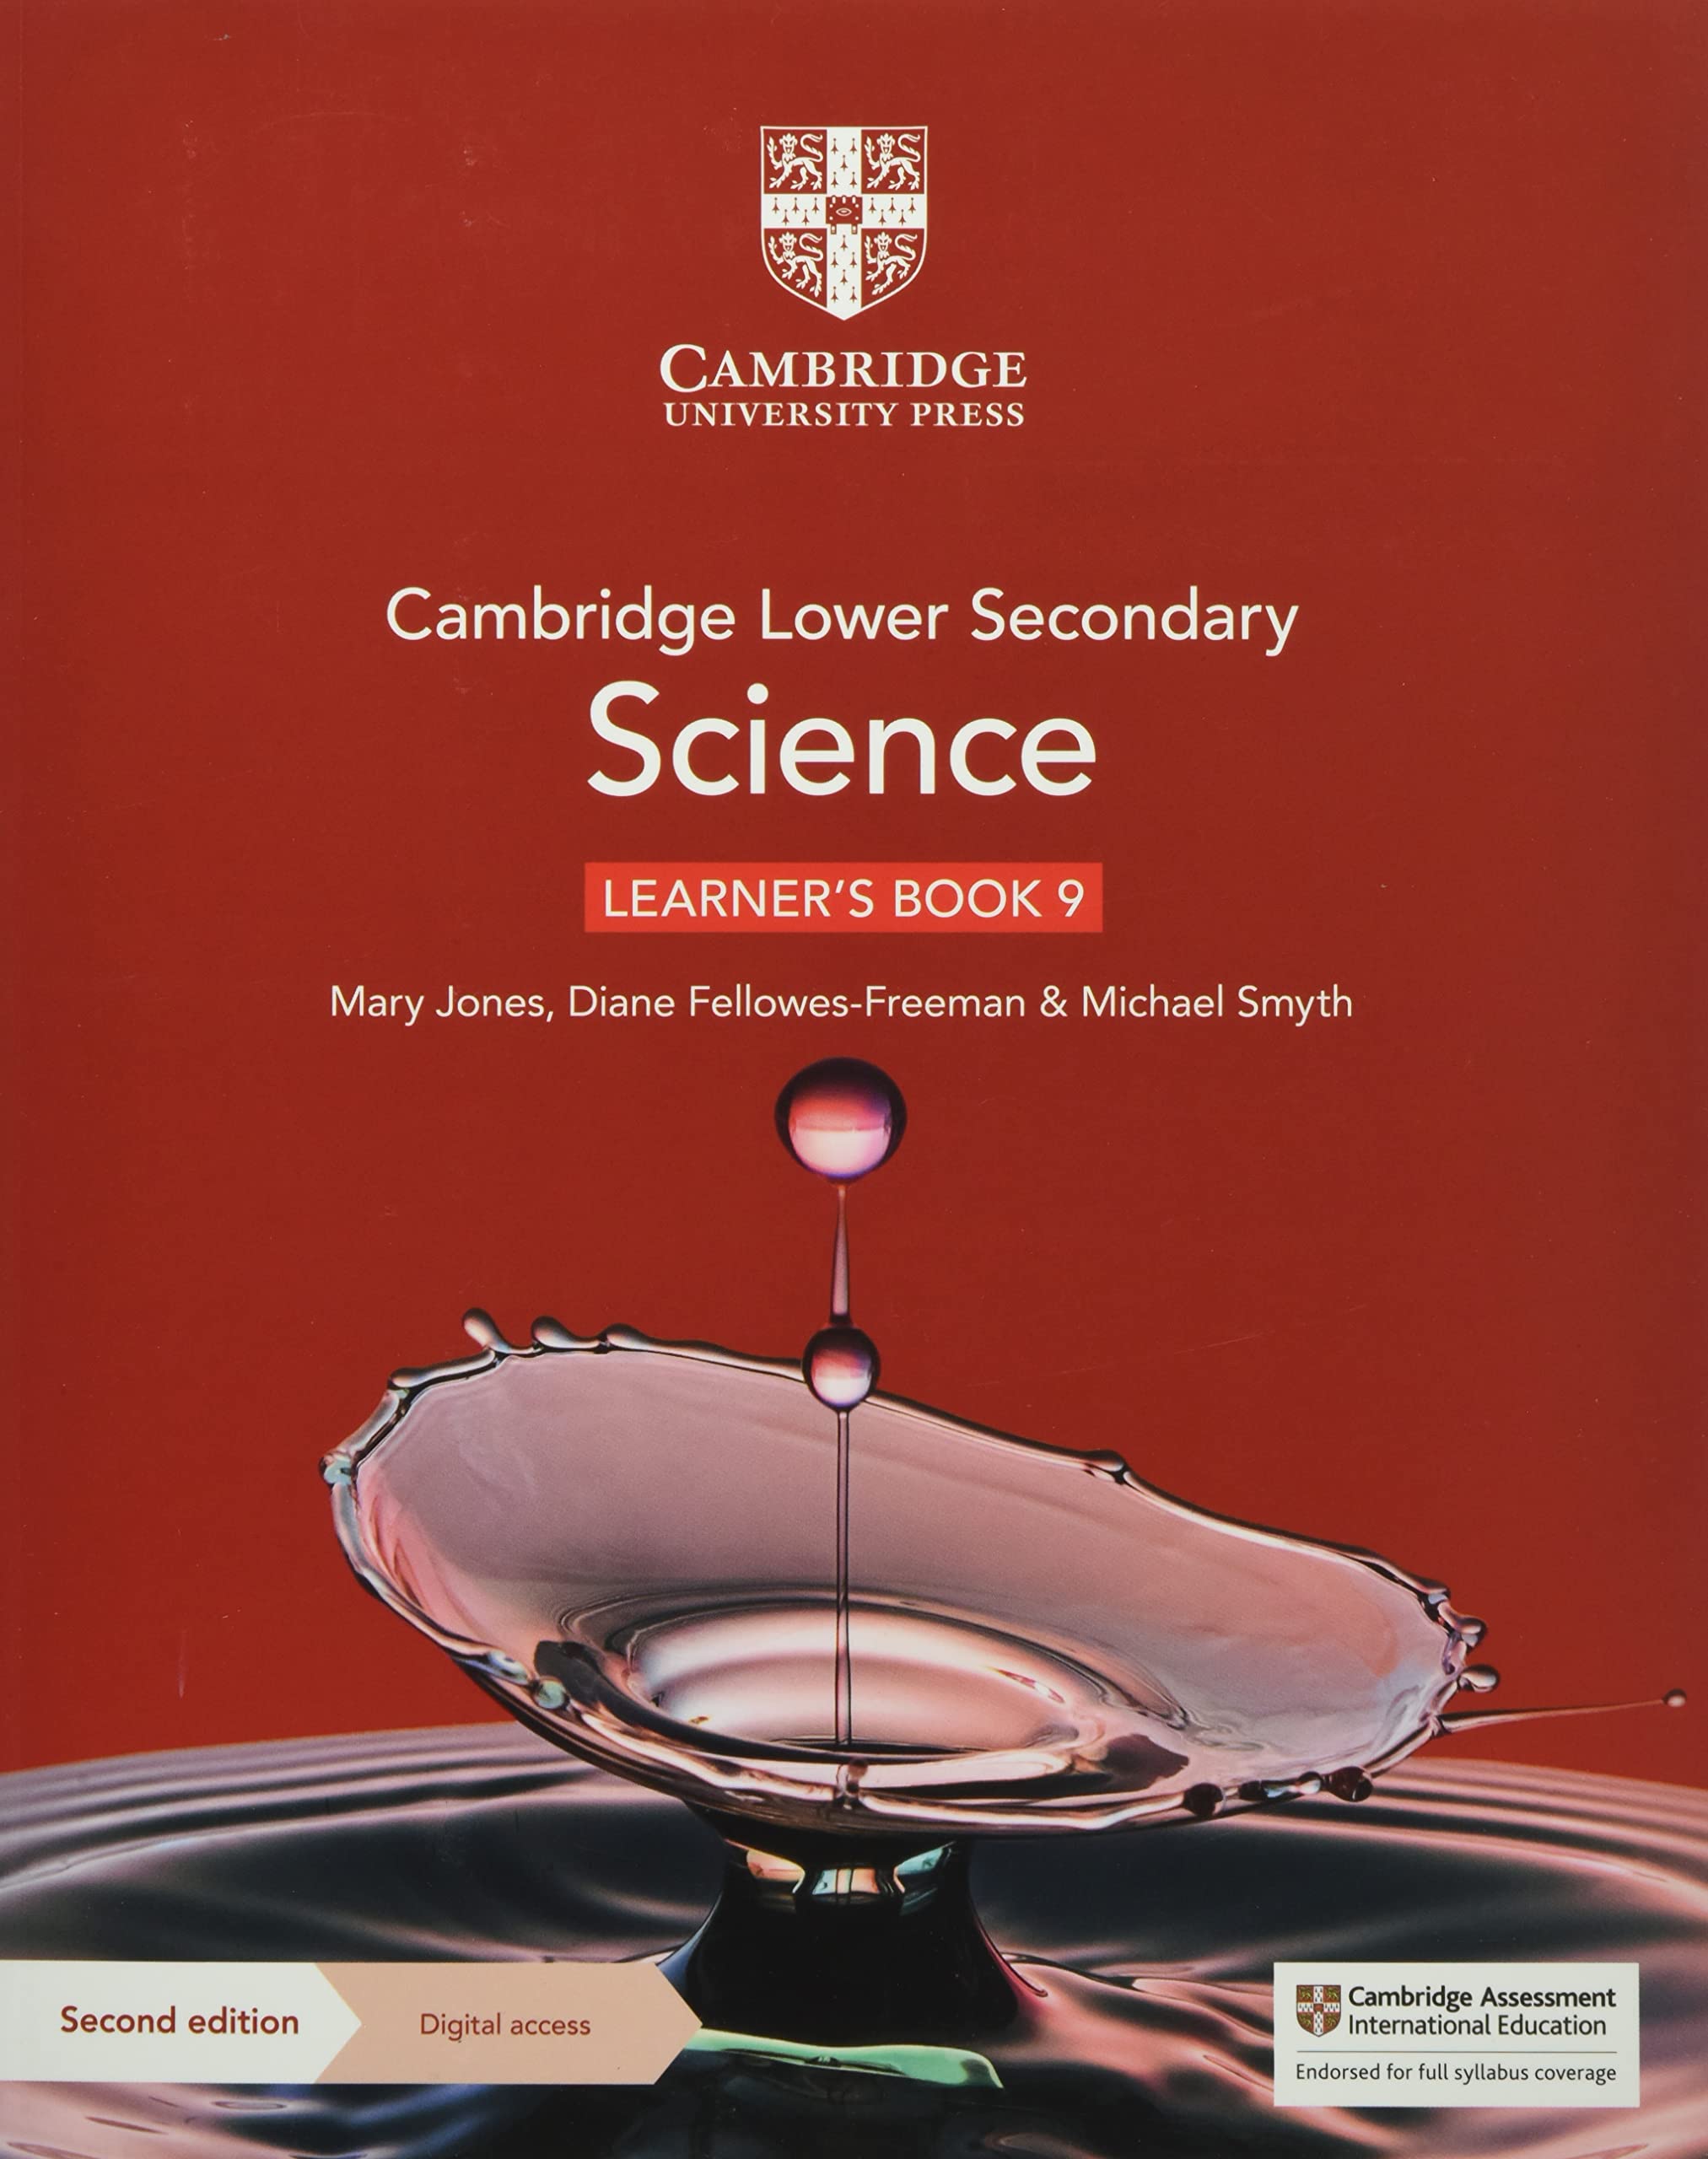 Cambridge Lower Secondary Science Learner's Book 9 with Digital Access 2nd Edition